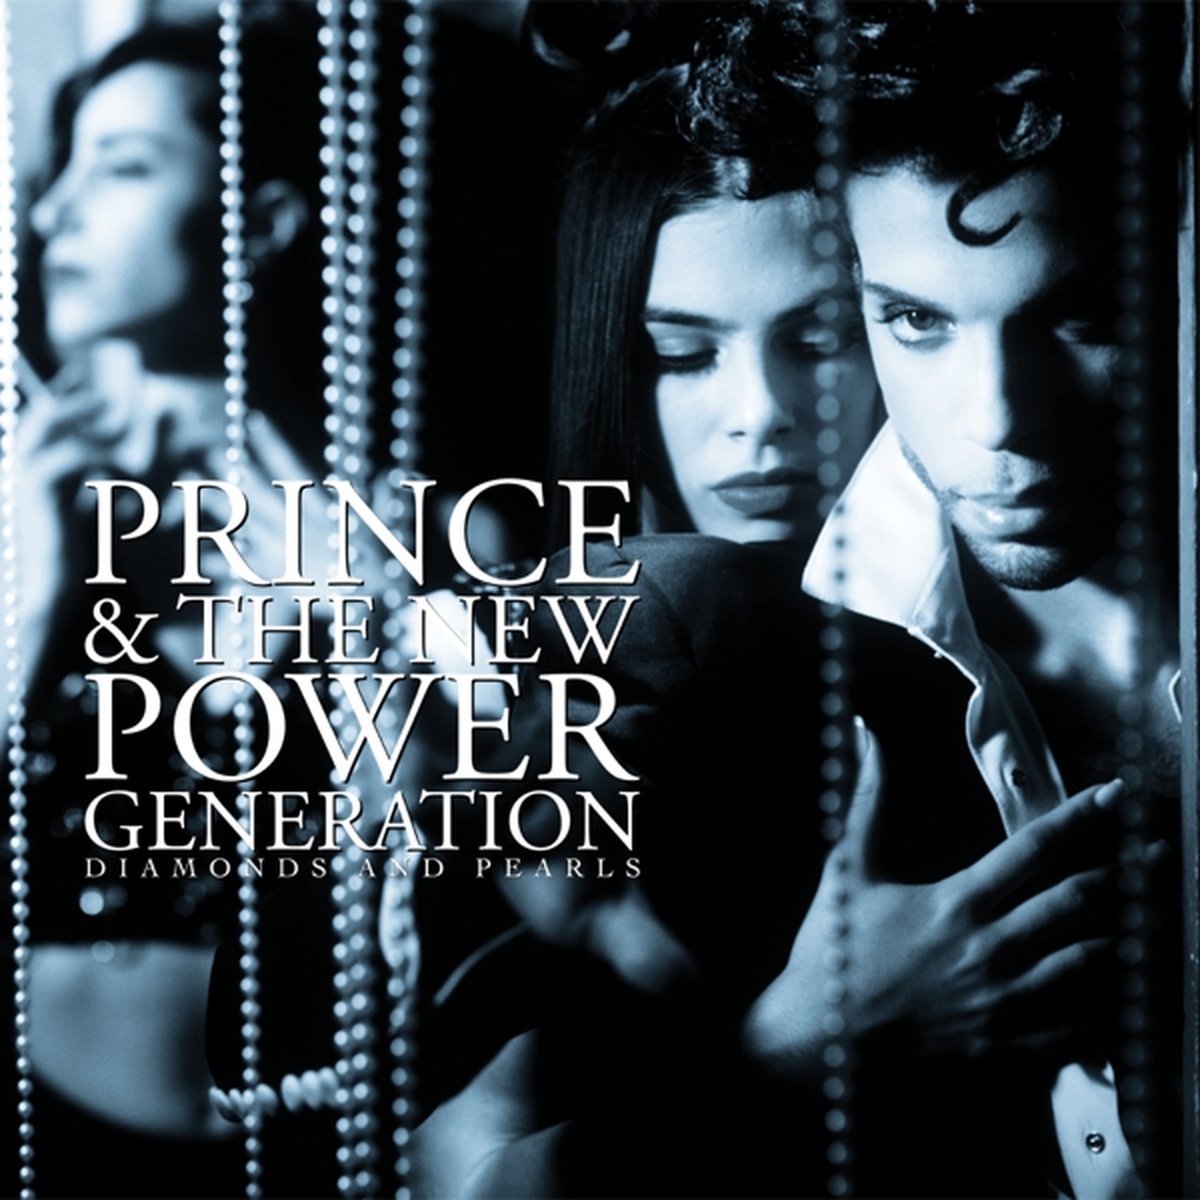 Prince & The New Power Generation - Diamonds And Pearls (Remastered) (Limited edition, clear vinyl) (2LP)